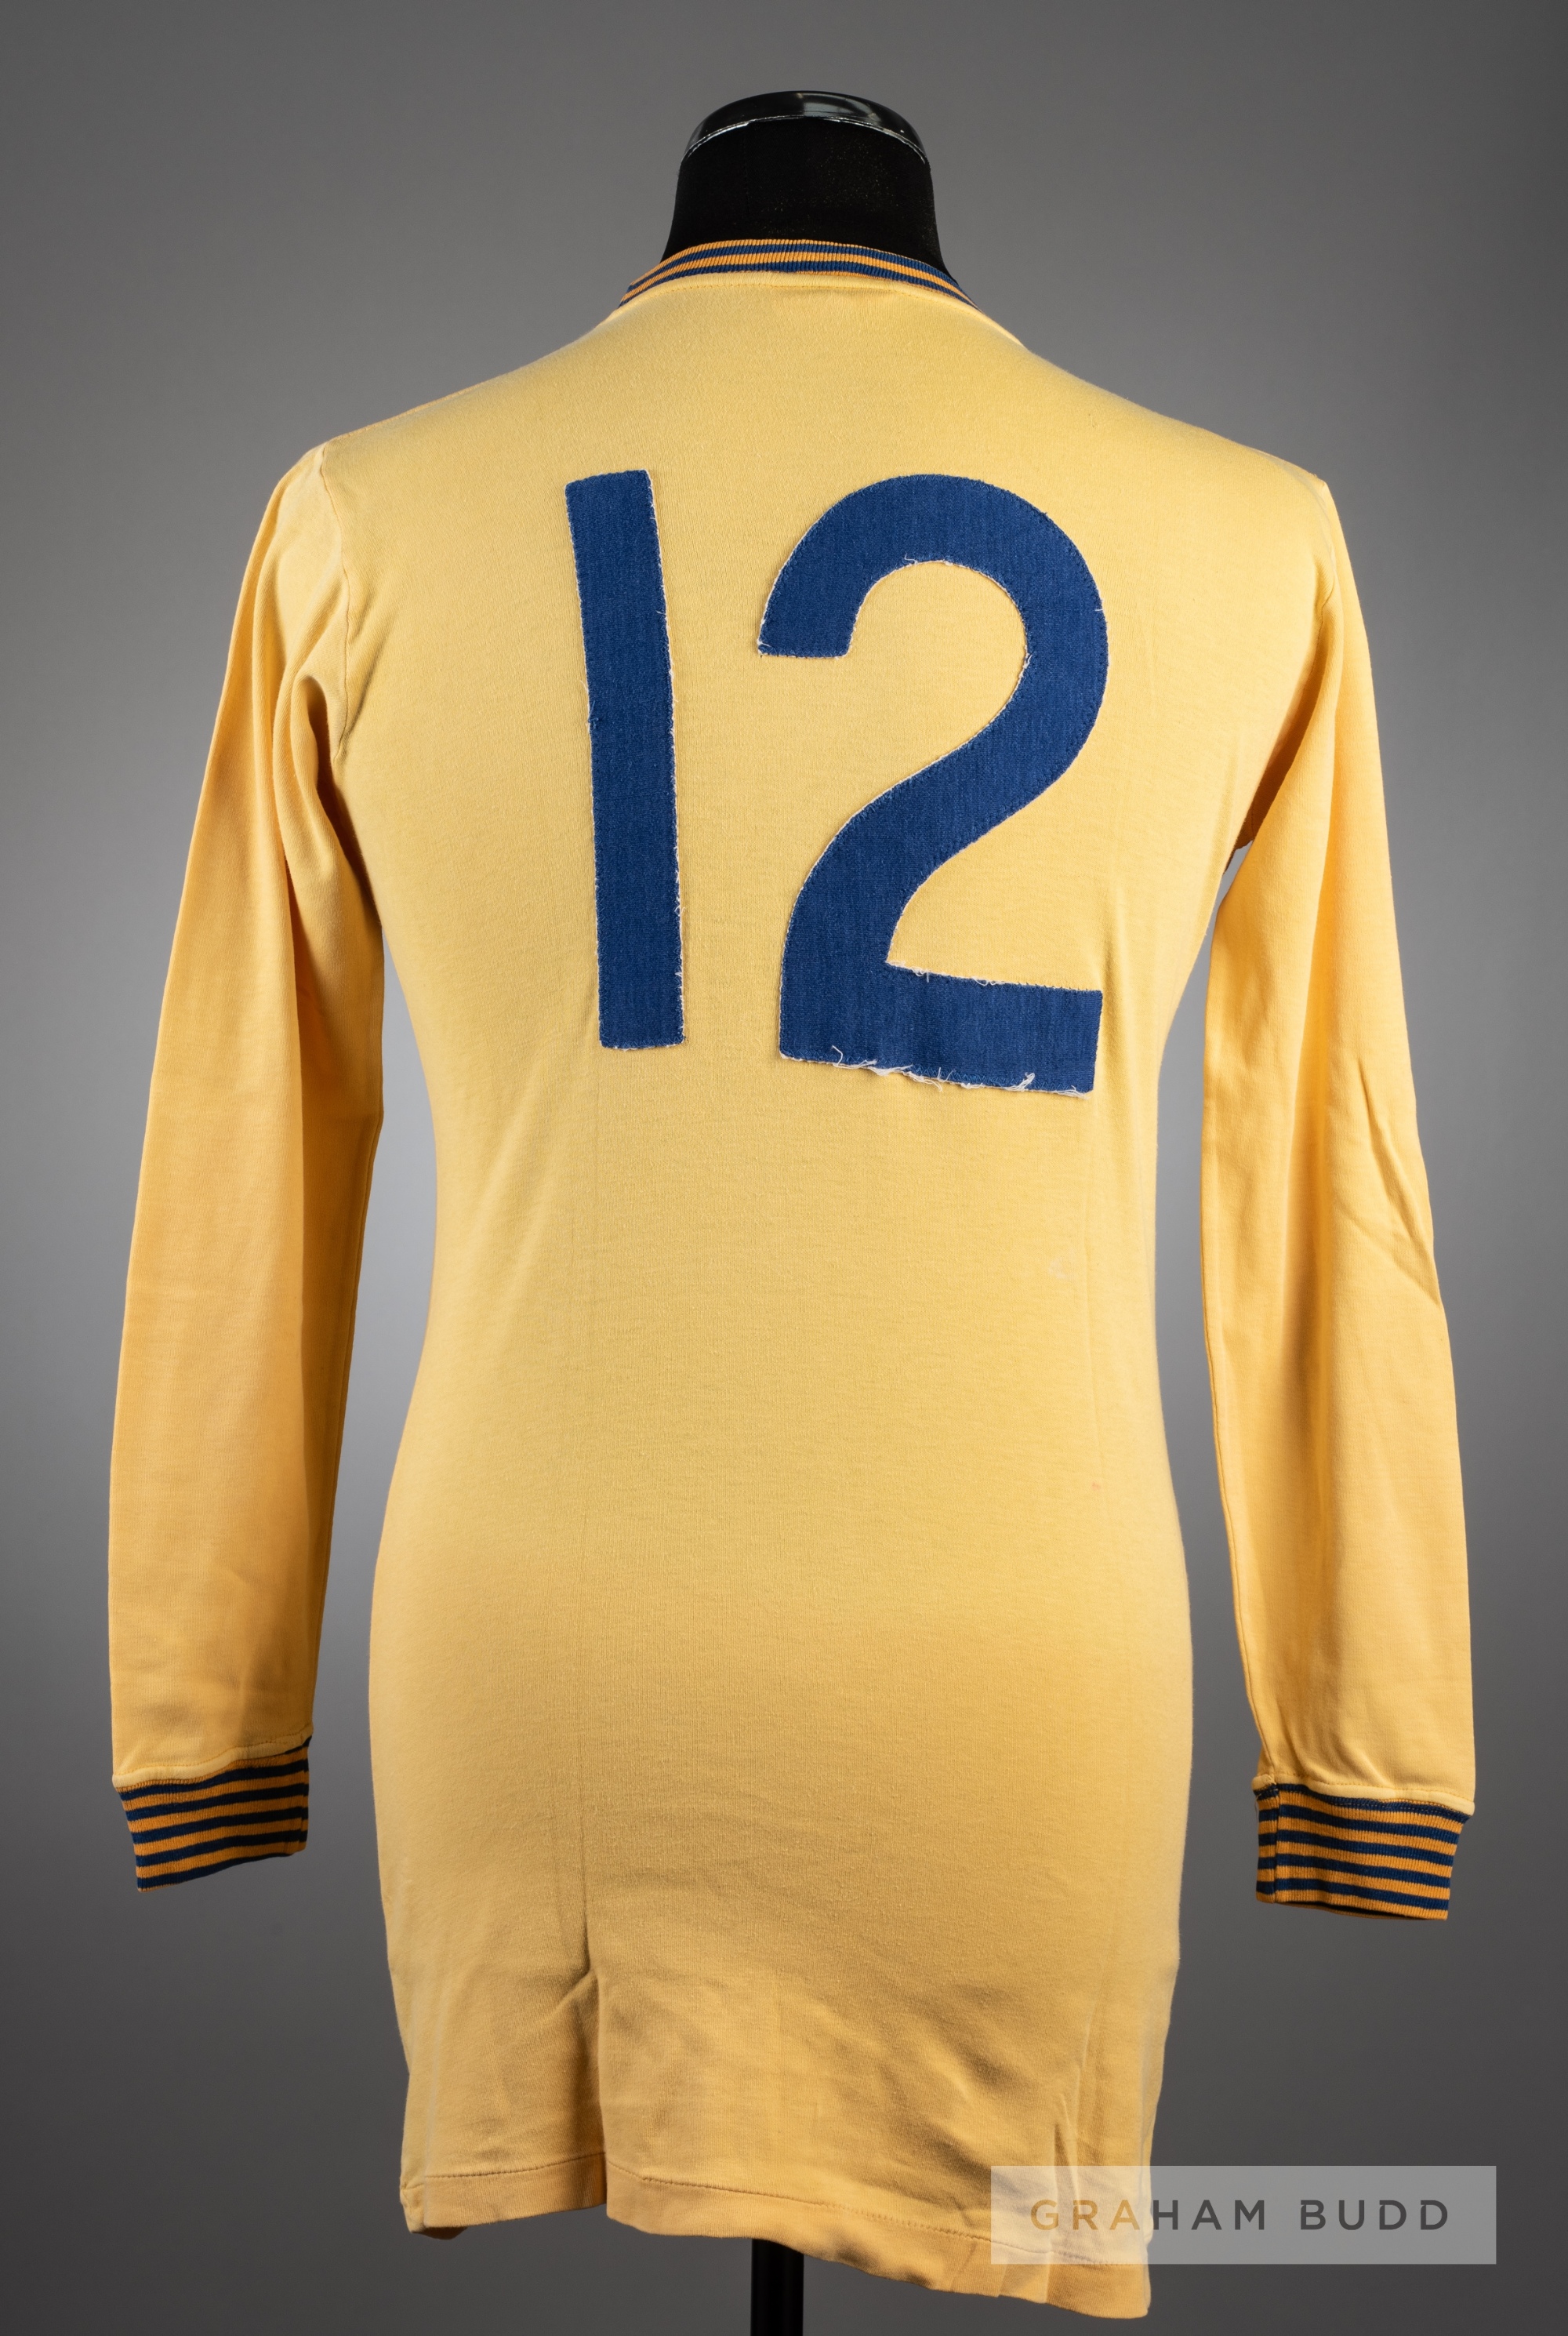 Yellow Torquay United No.12 substitute's jersey circa 1969,  by Umbro, long-sleeved, gold and blue - Image 2 of 2